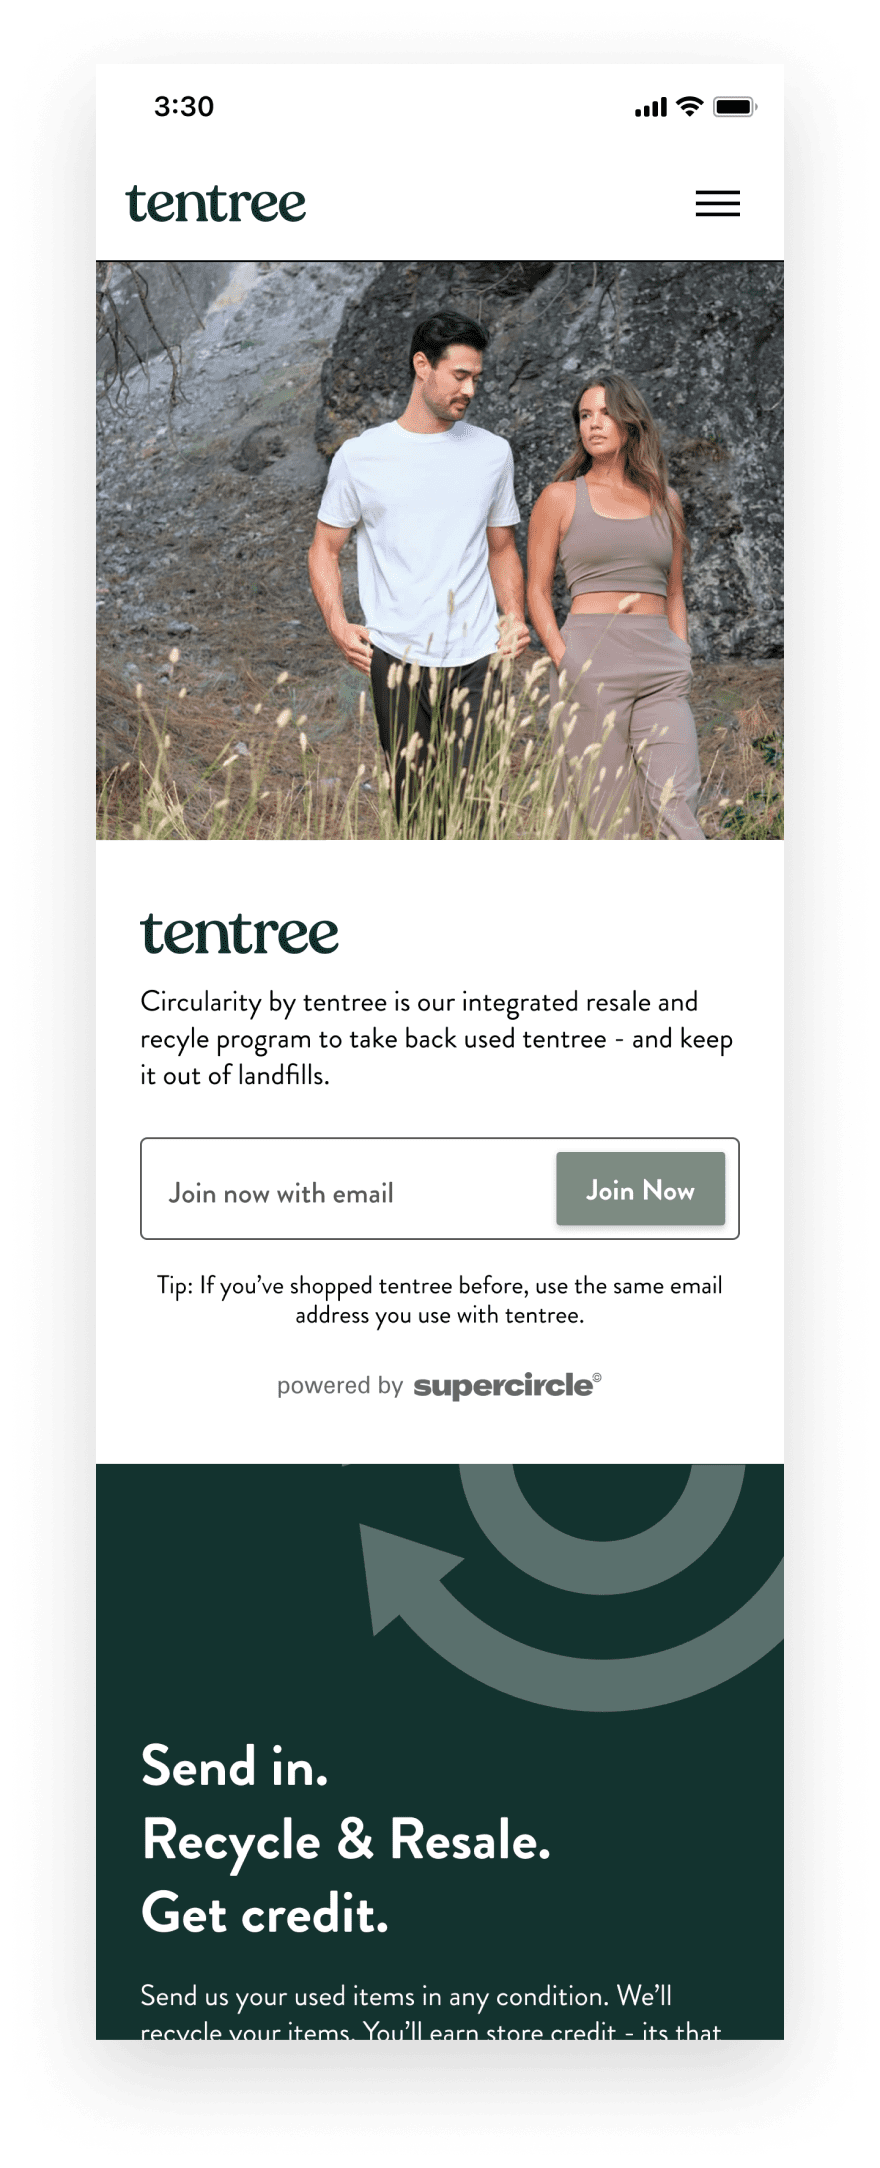 Tentree white label recycling experience for customers.